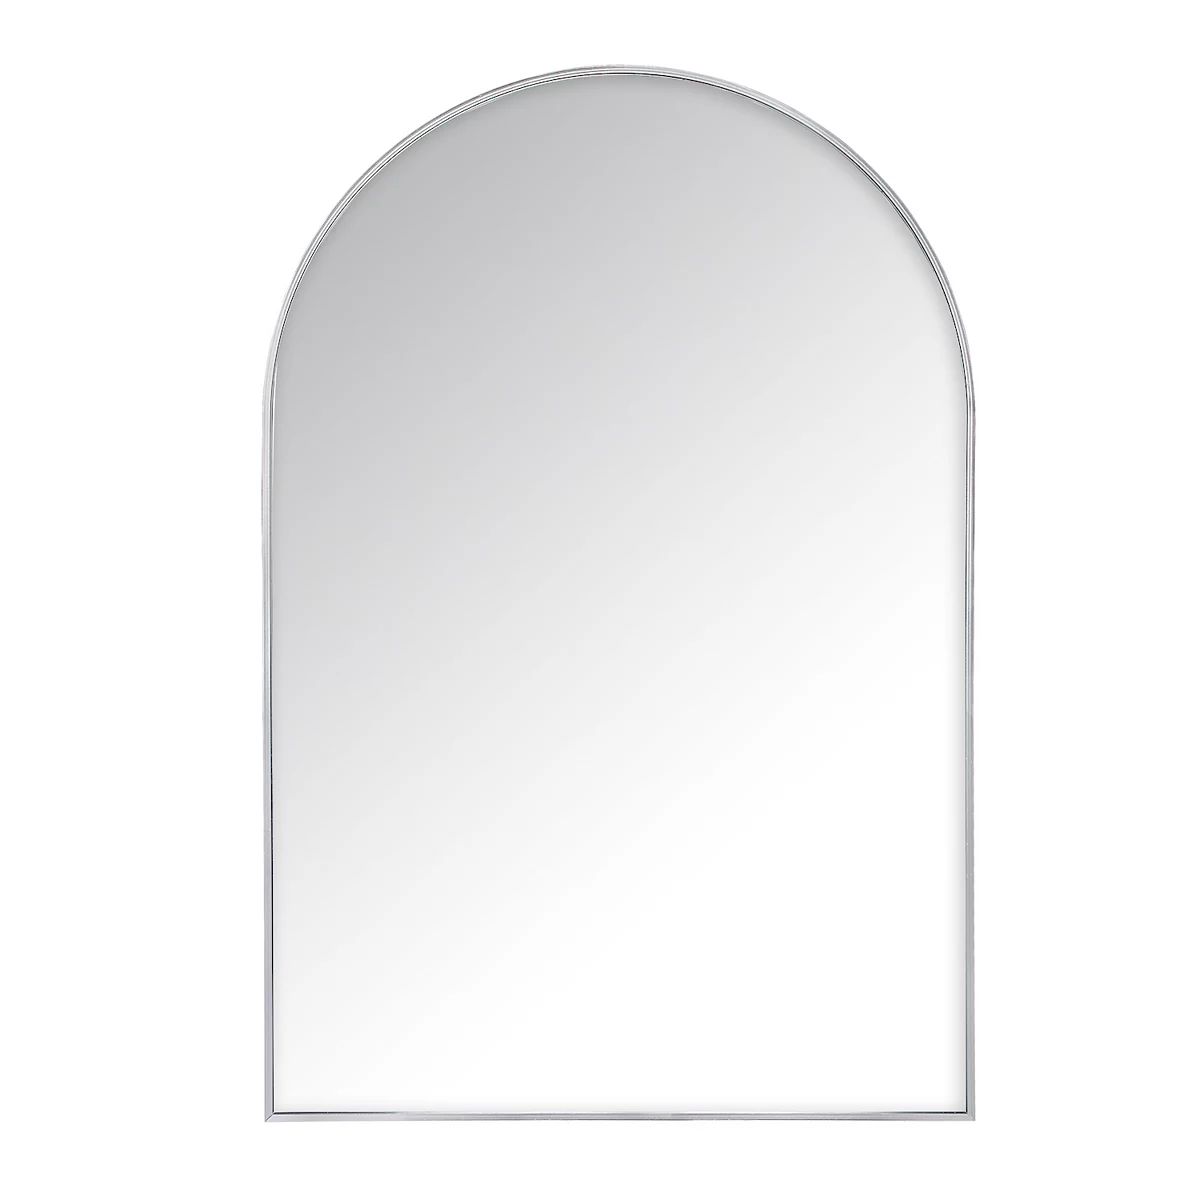 Belle Maison Arched Wall Mirror | Kohl's